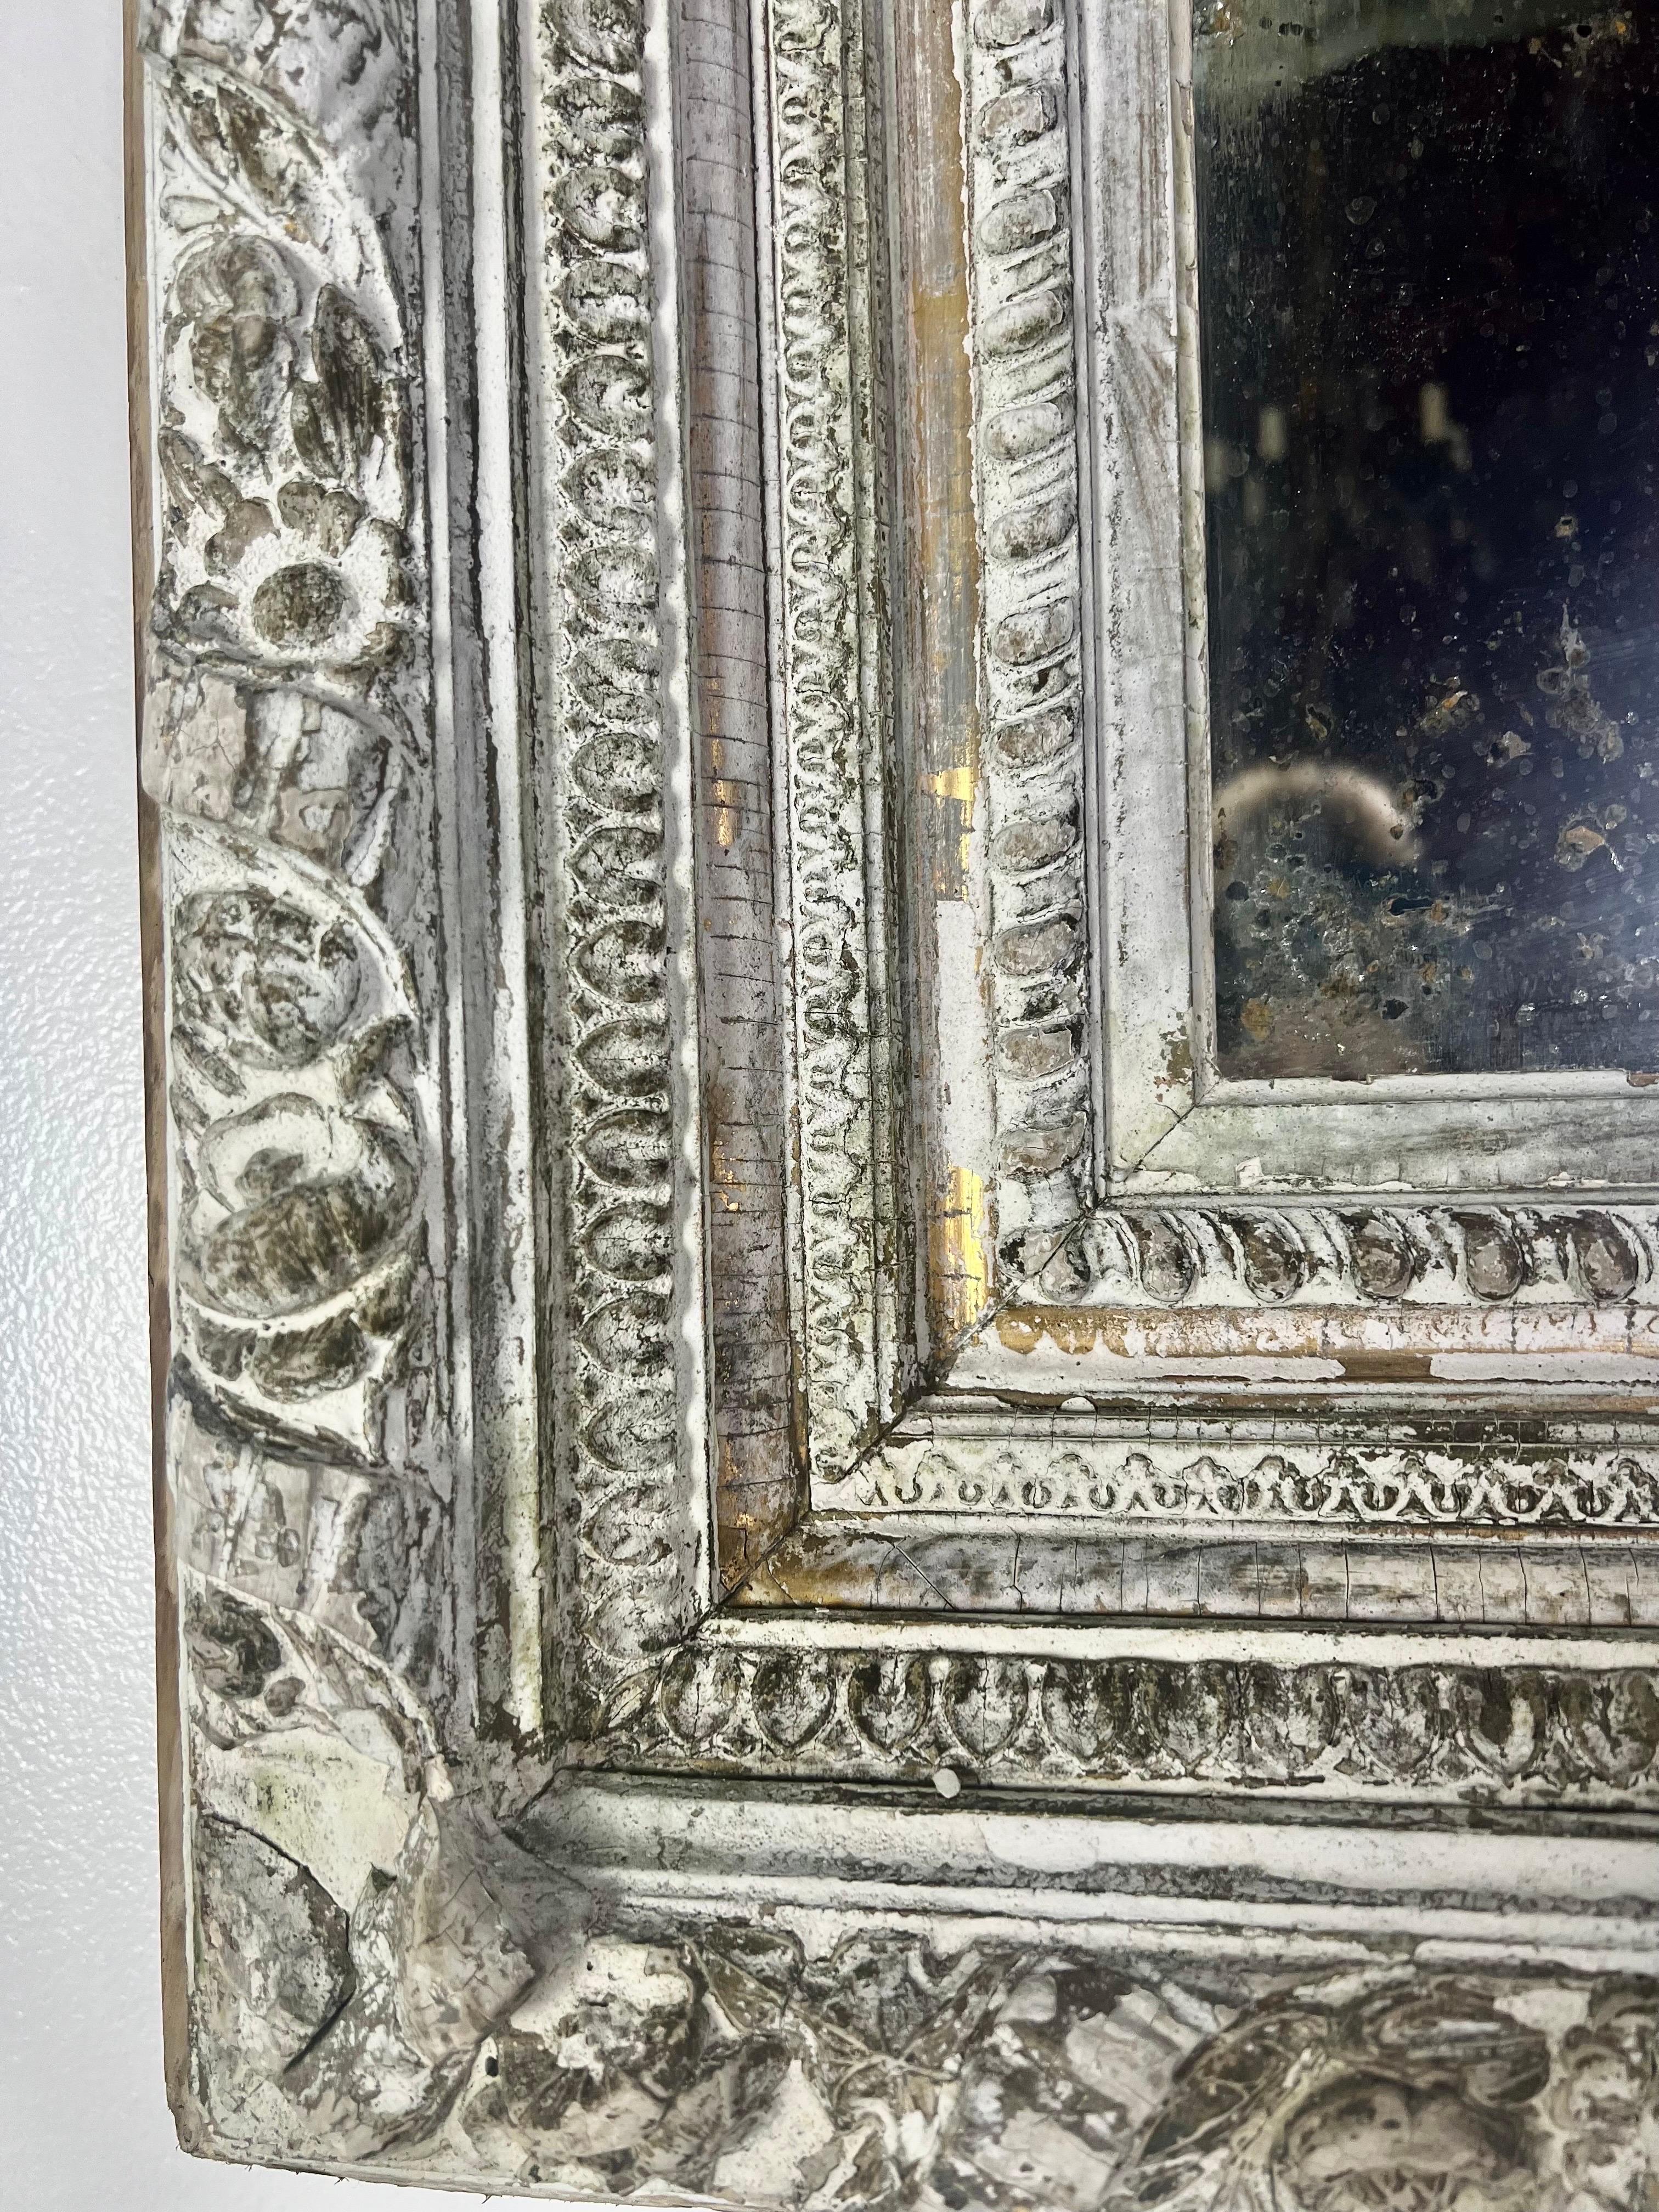 19th century carved wood & gesso mirror. There are remnants of a gold leaf finish from years ago, but the mirror is white/gray in color. The frame is adorned with finely carved details throughout. The finish is beautifully worn but there are bits of